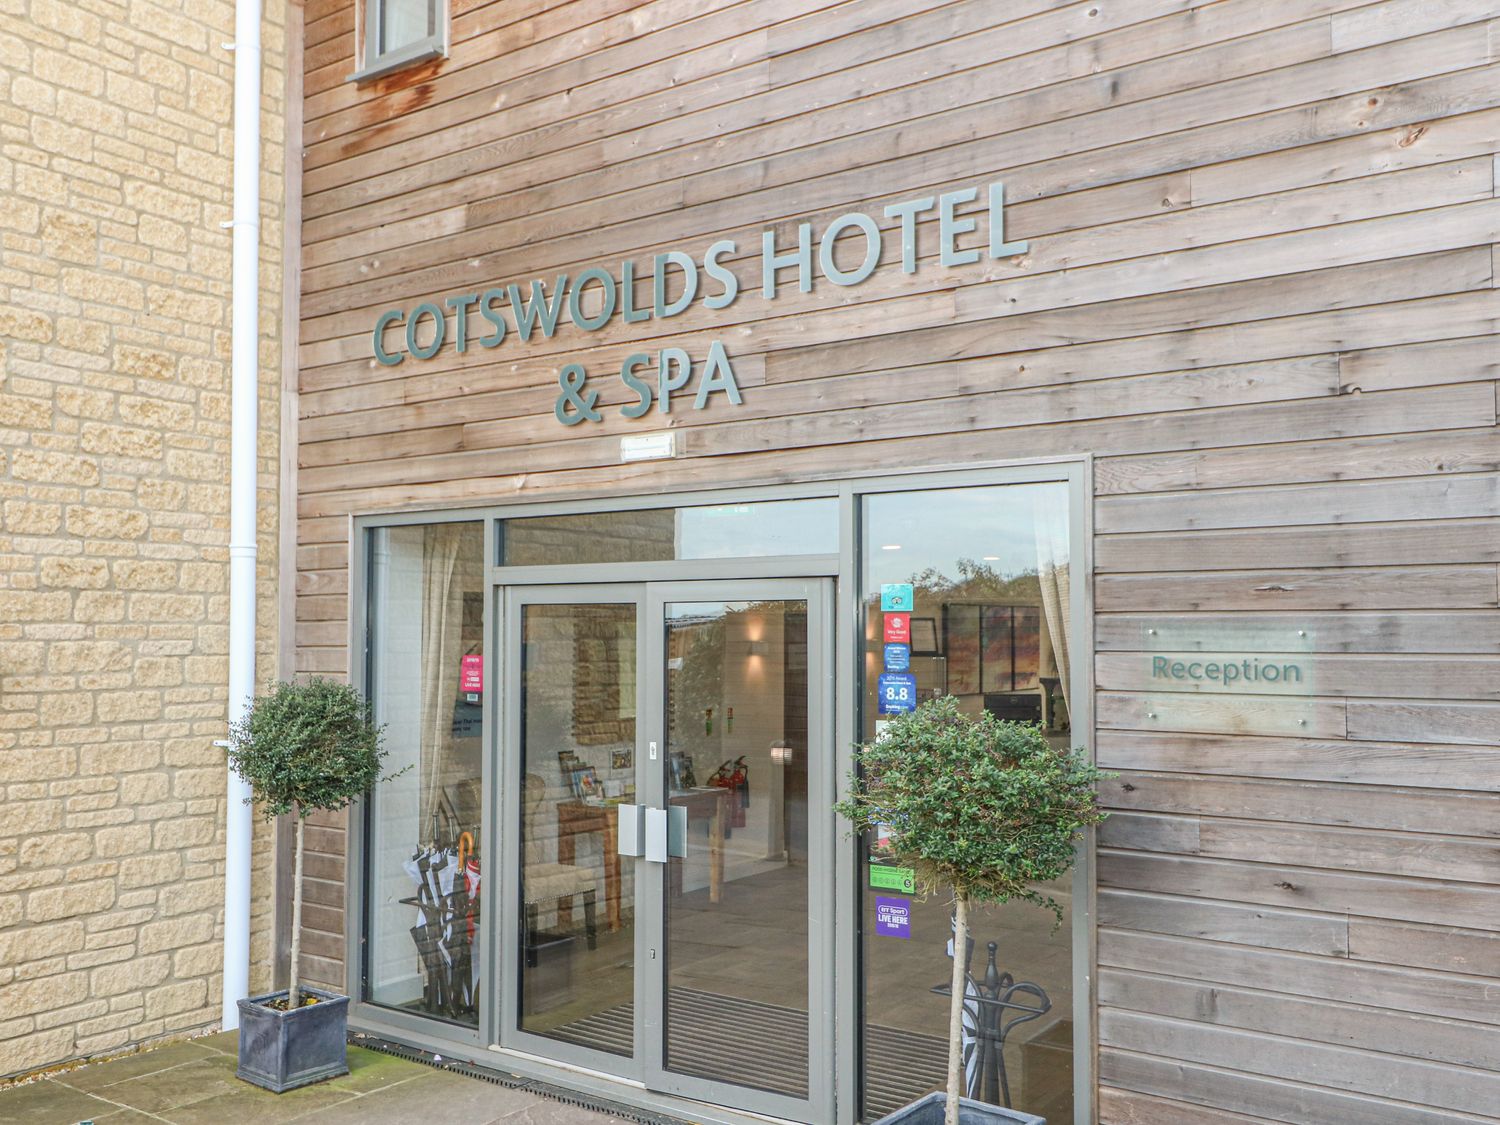 Cotswold Club Apartment 2 Bedrooms - Cotswolds - 1034616 - photo 1